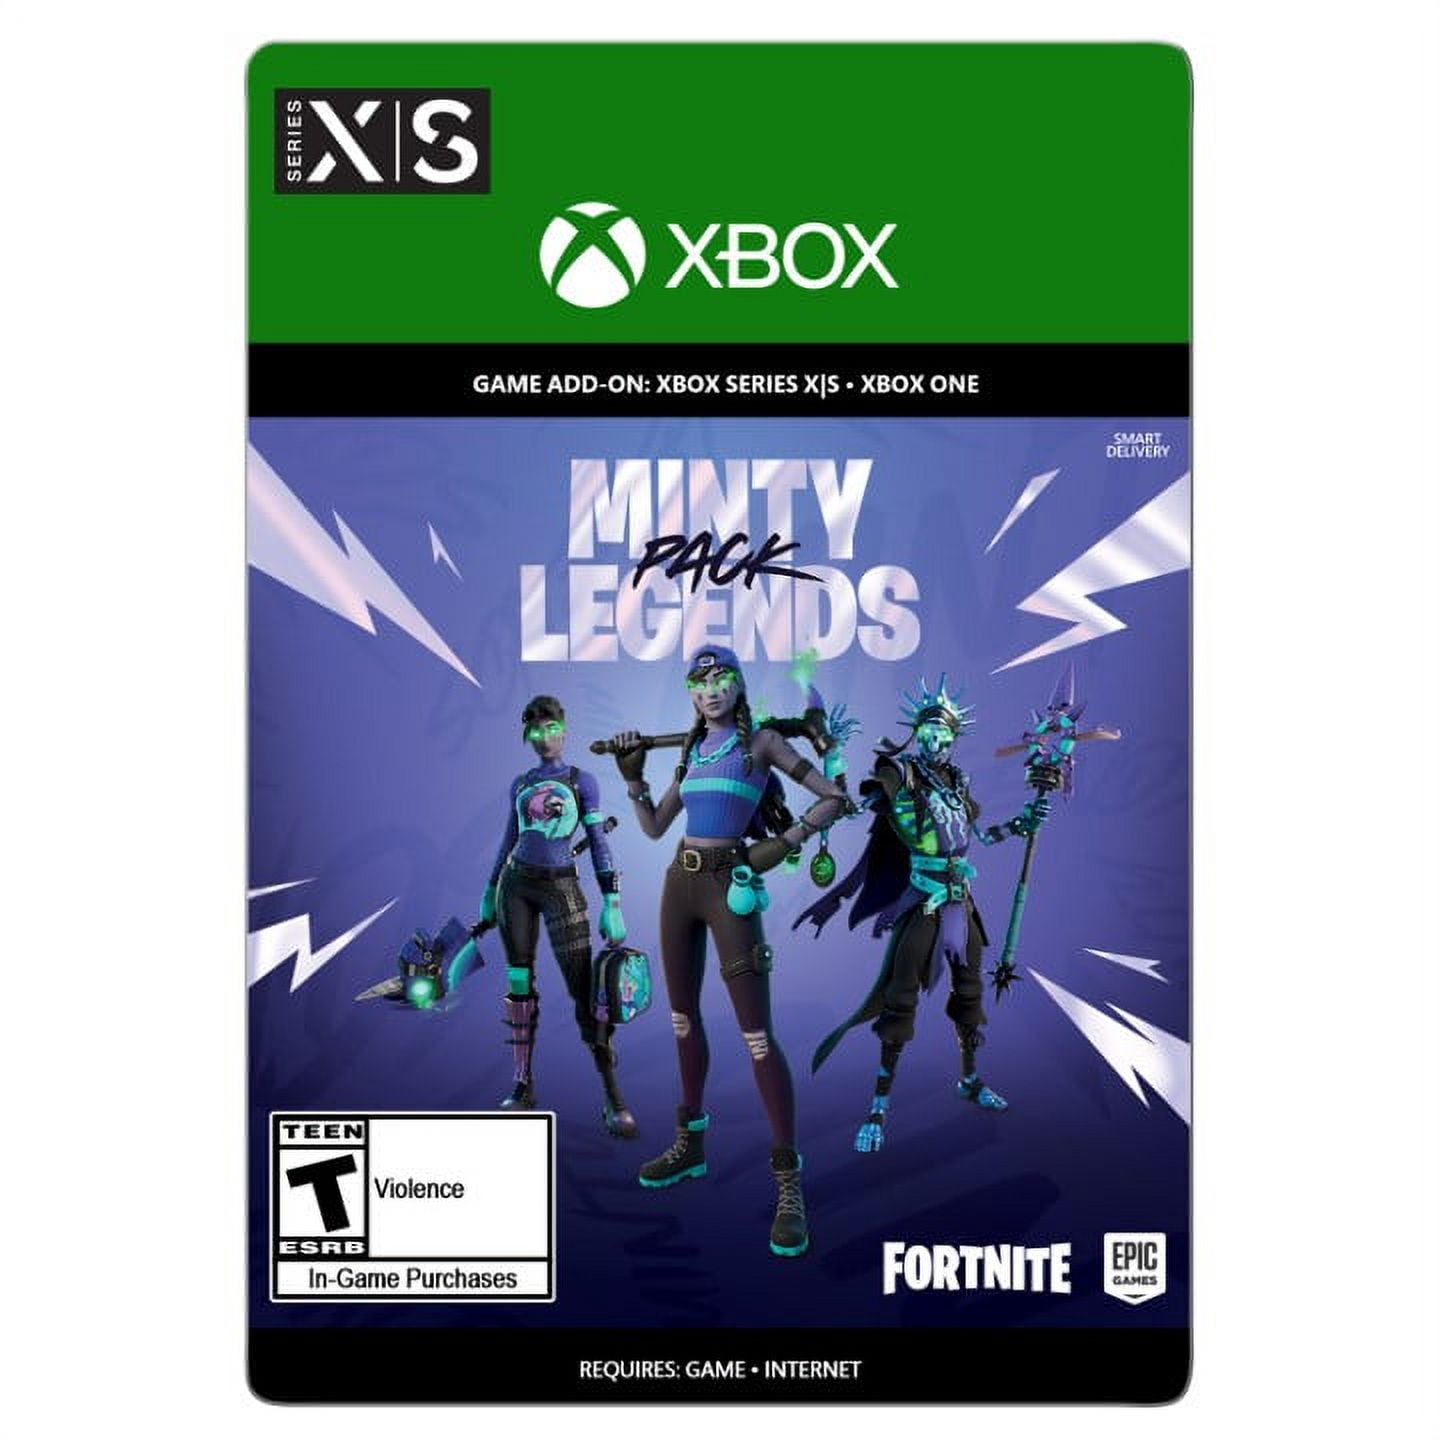 Fortnite 8,400 V-Bucks, (3 x $19.99 Cards) $59.97 Physical Cards, Gearbox 